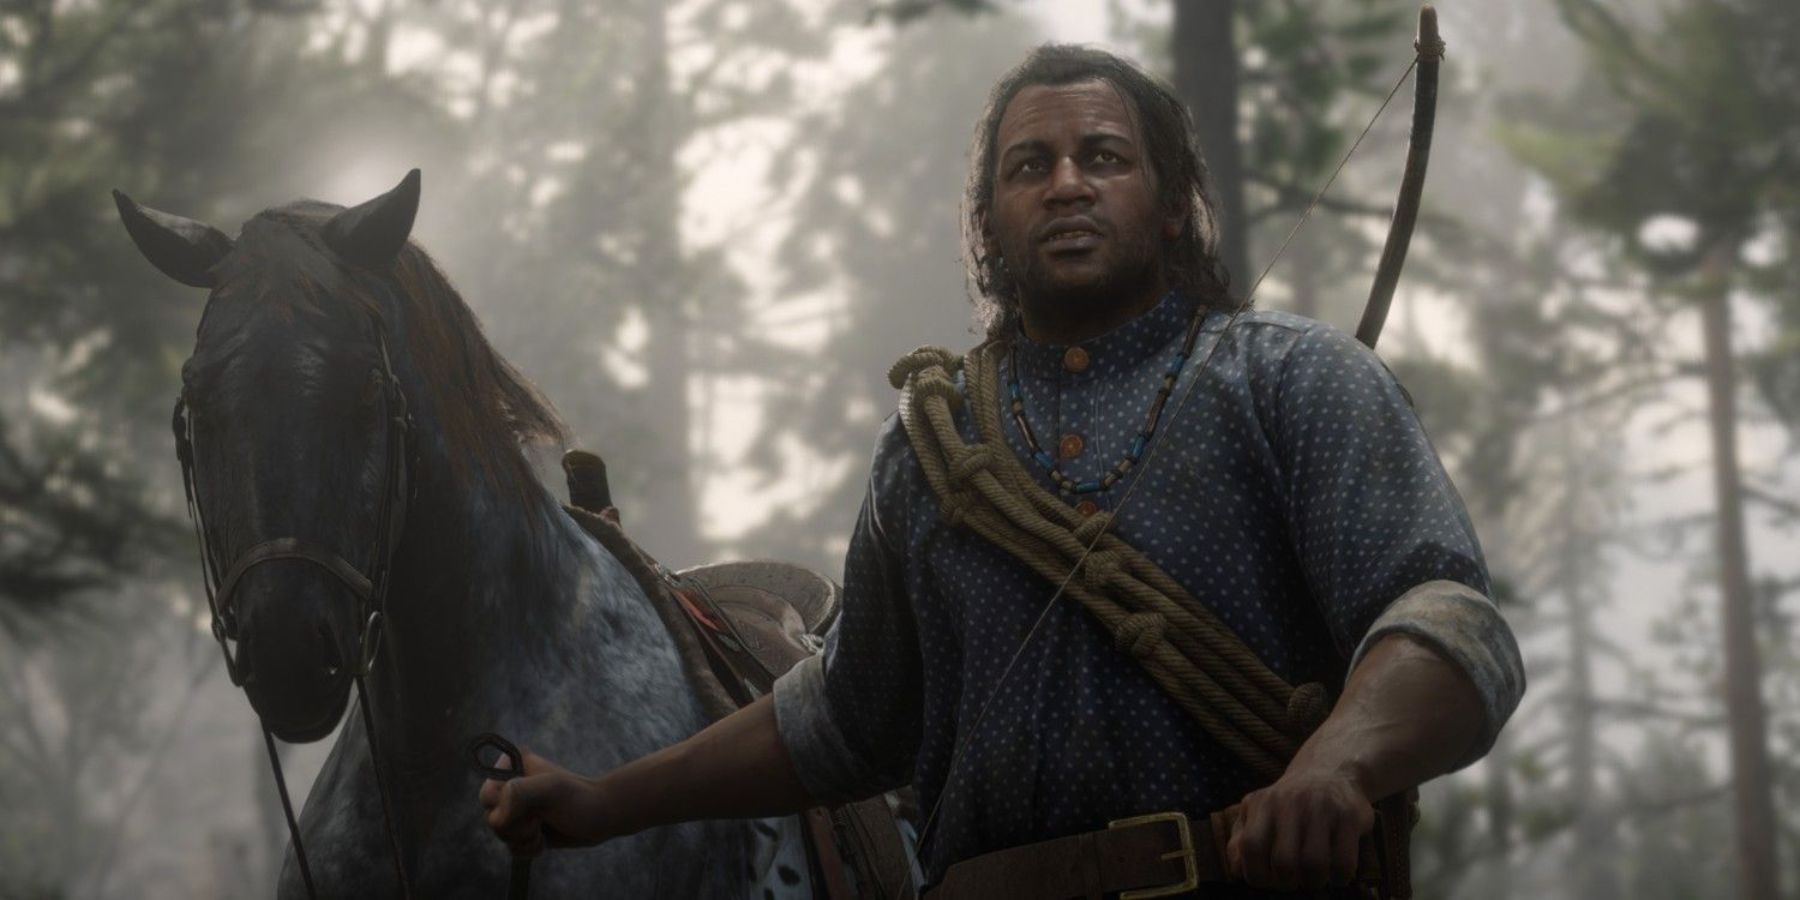 Funny Red Dead Redemption 2 Video Shows Charles Obliviously Crash Face-First Into a Train